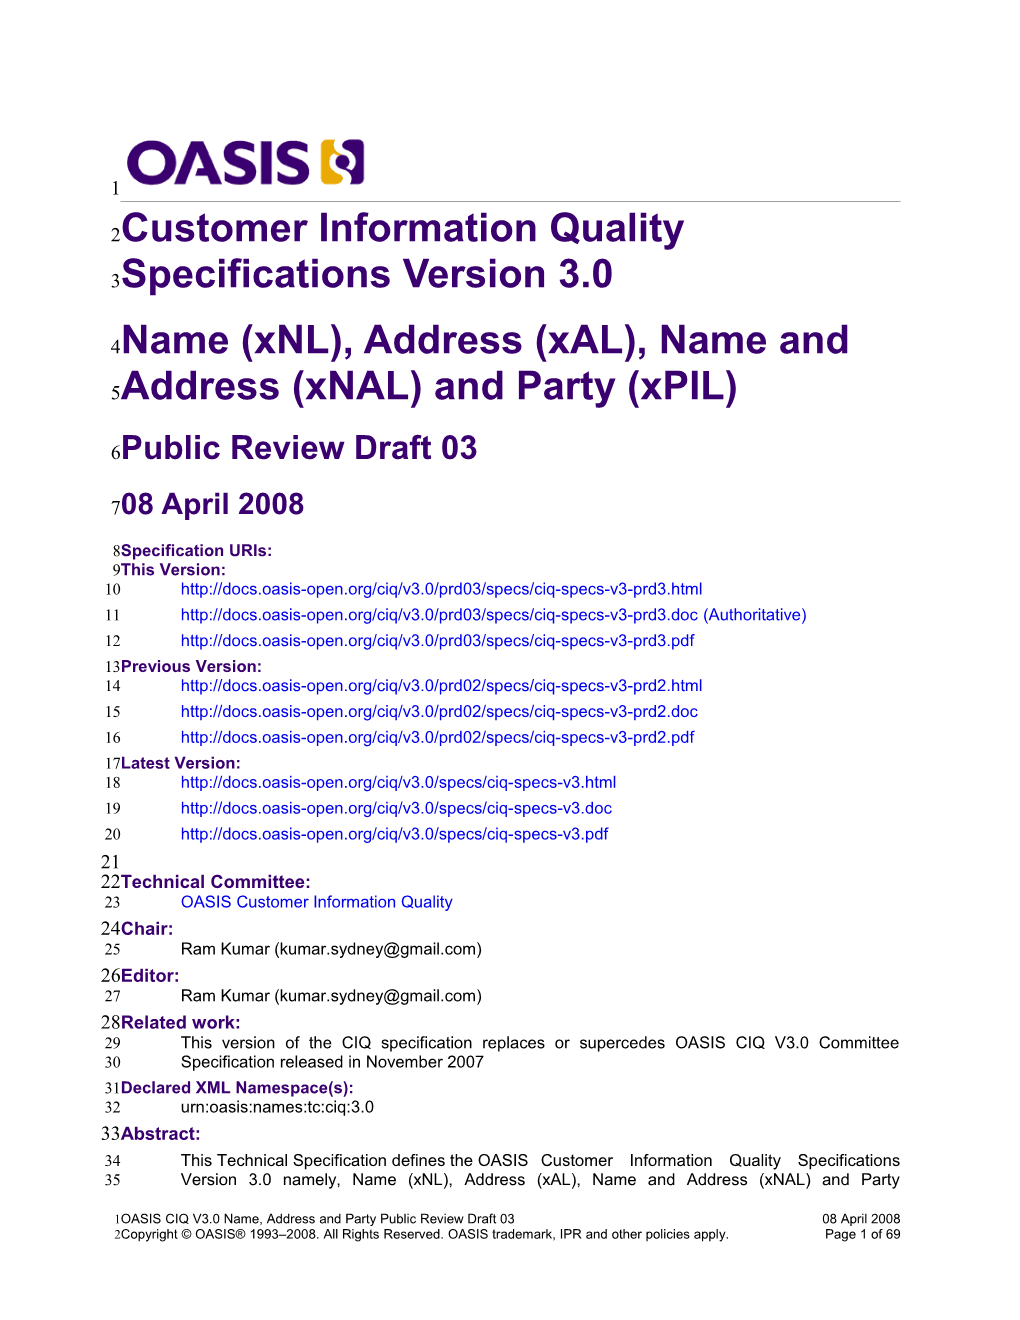 Customer Information Quality Specifications Version 3.0 - Name, Address and Party